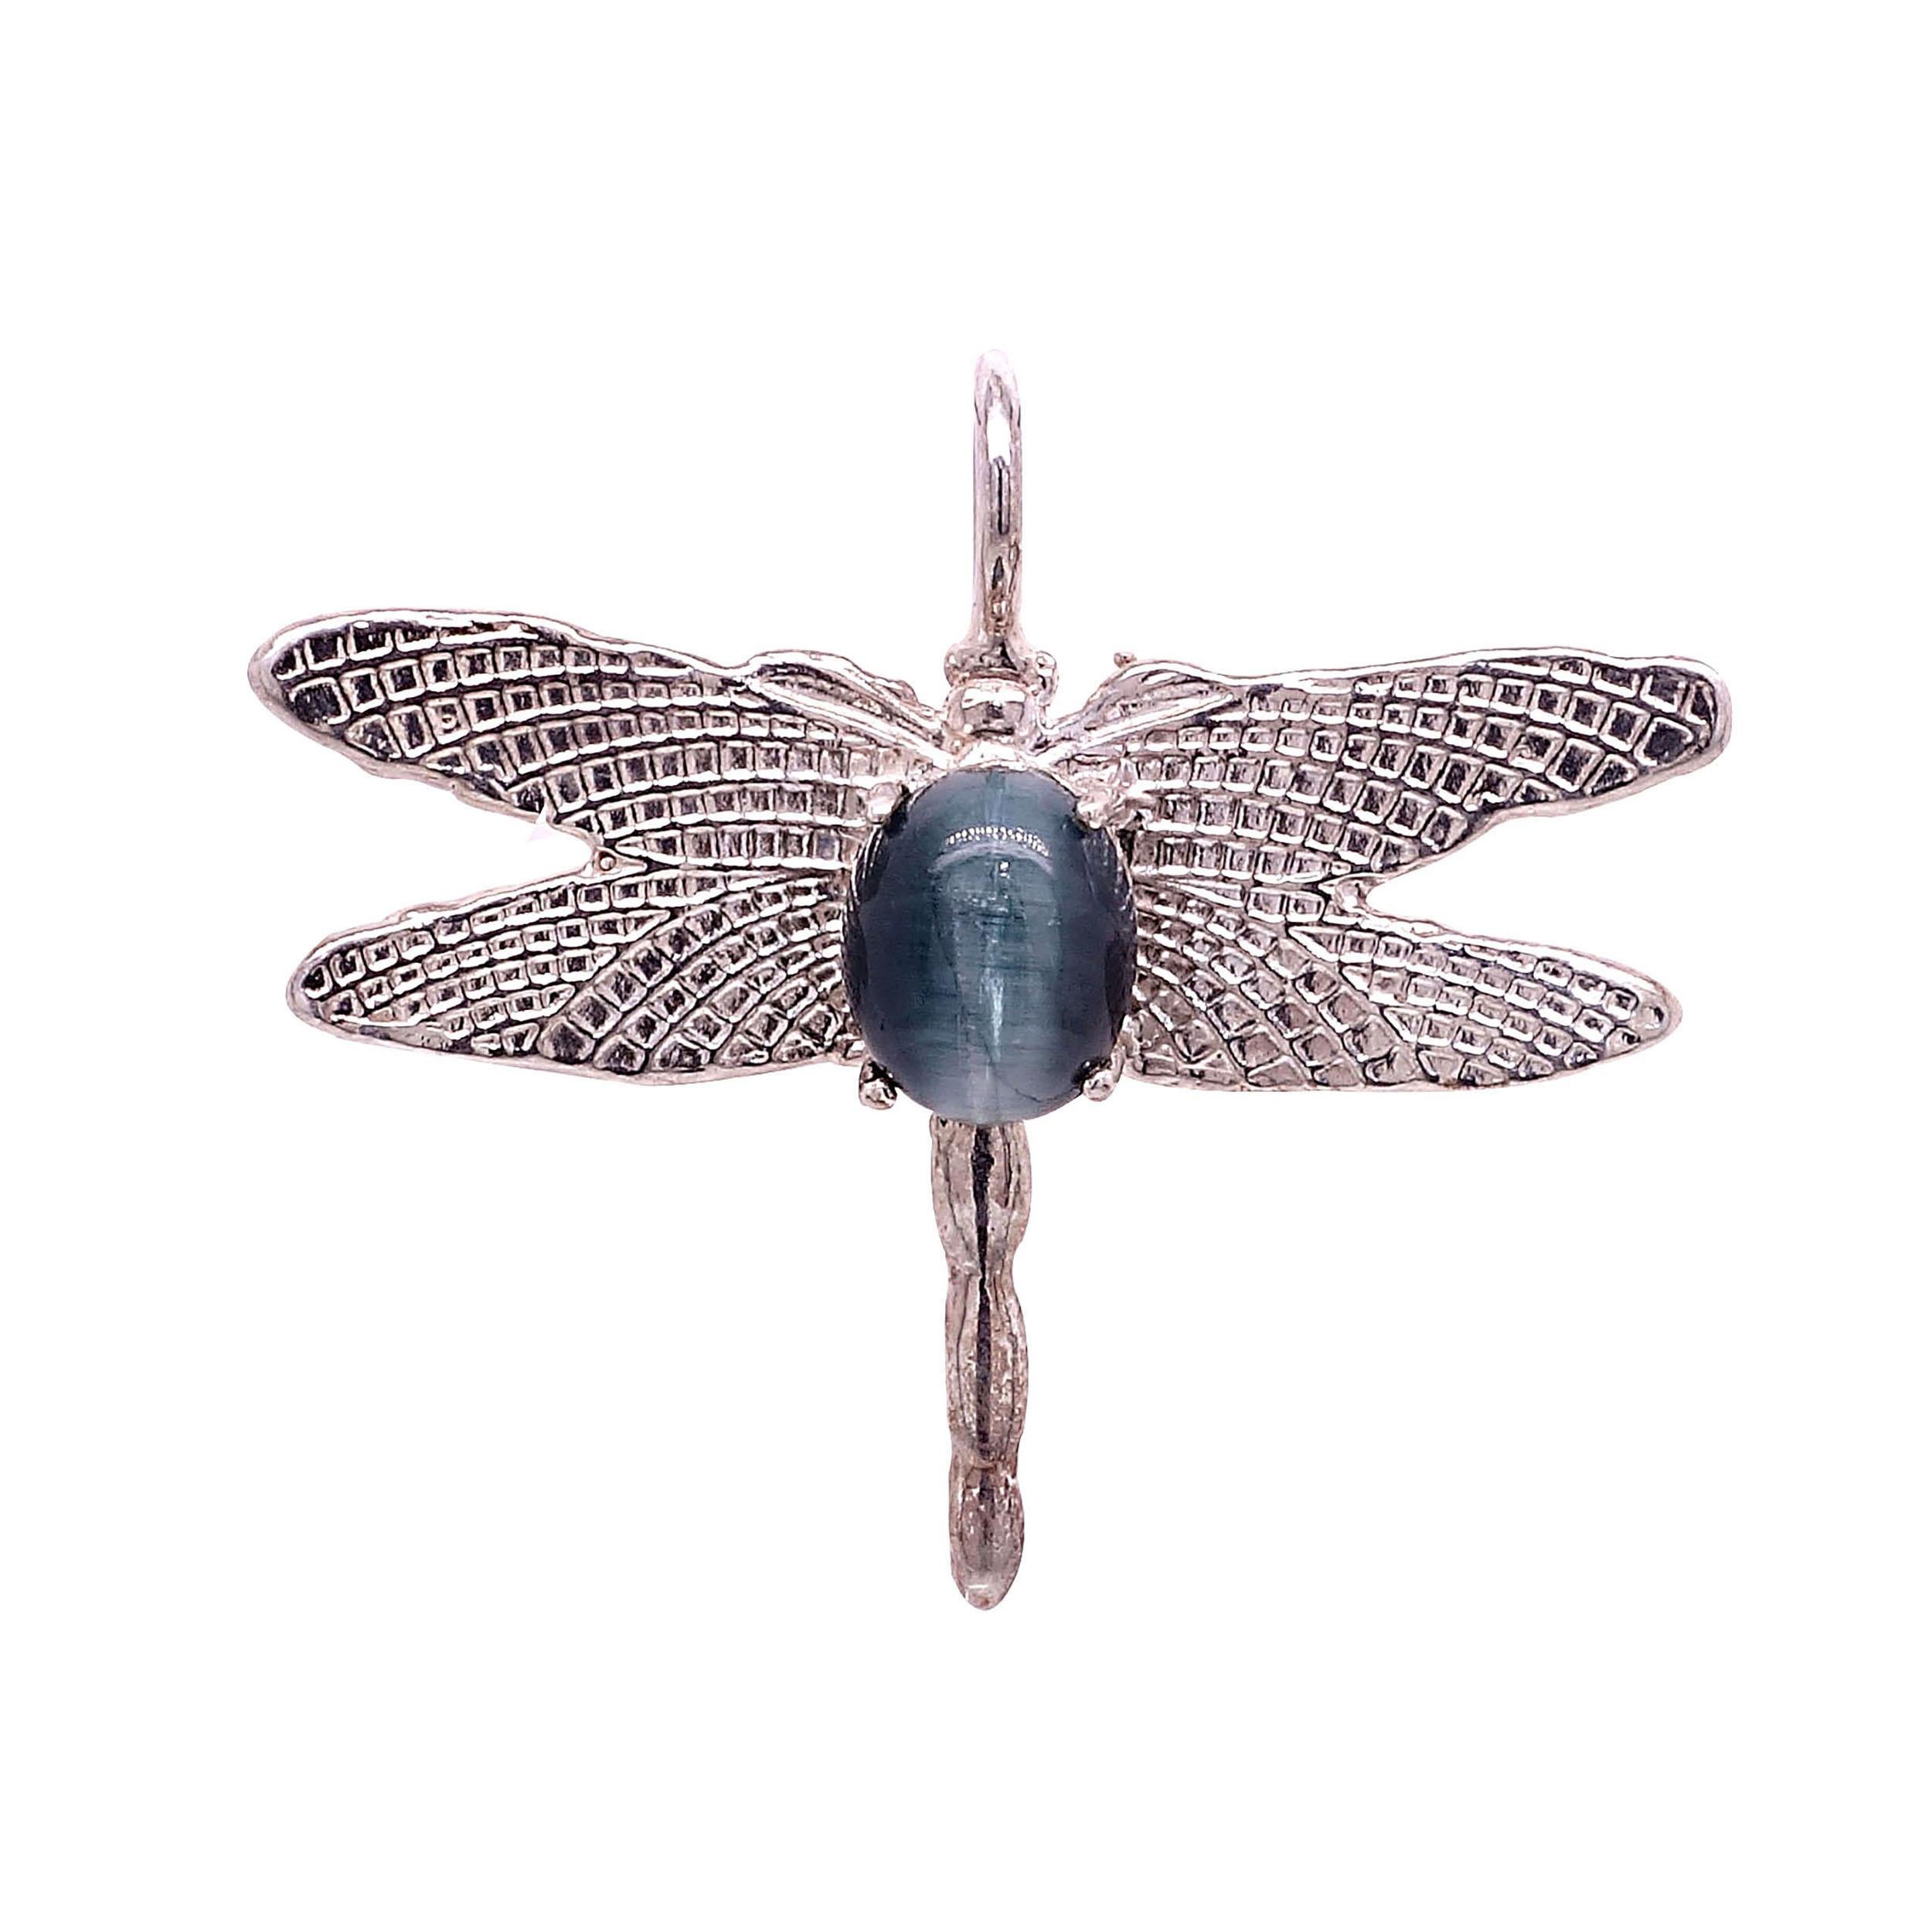 Wonderful pendant of Sterling Silver Dragonfly with a body of blue Cat's Eye Tourmaline. This delightful pendant is such fun, you'll want to wear it with everything. The entire pendant is 1 1/4 inches long by 1 3/8 inches wide. The detail in the